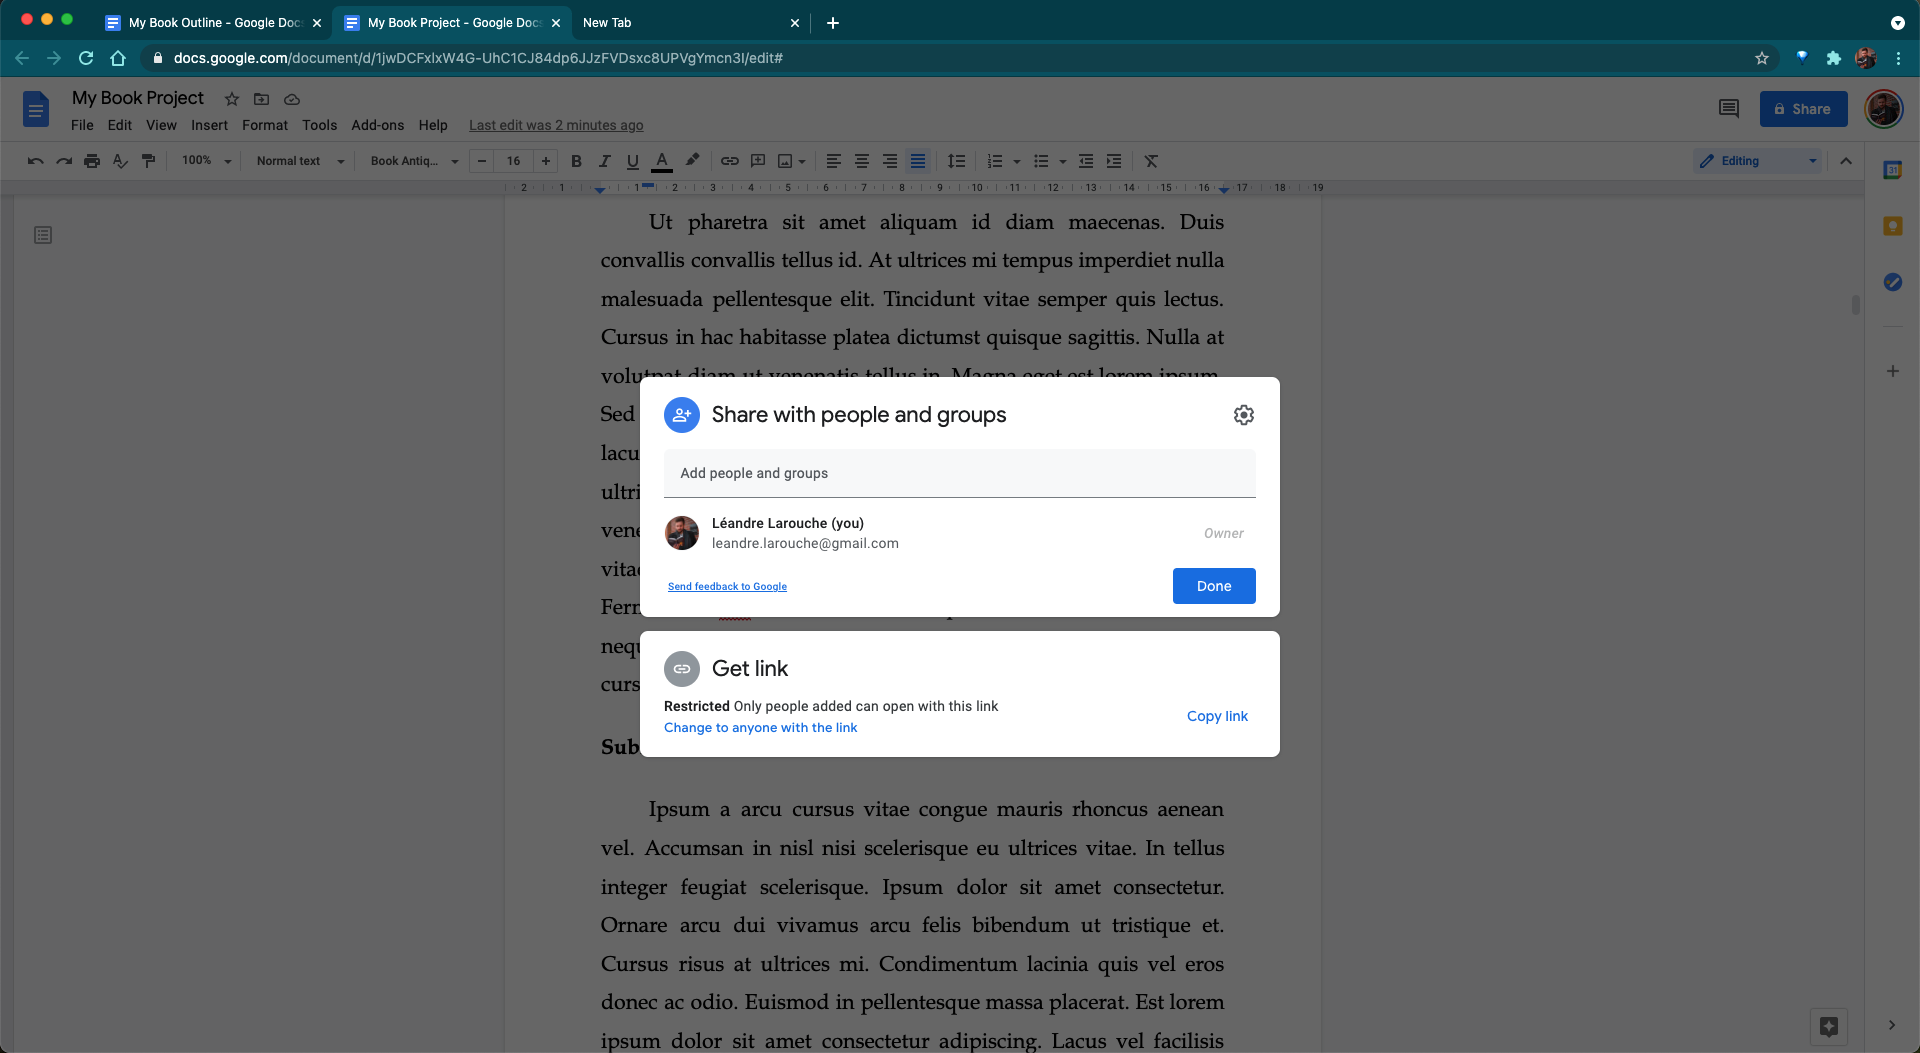 Sharing your Google Docs document